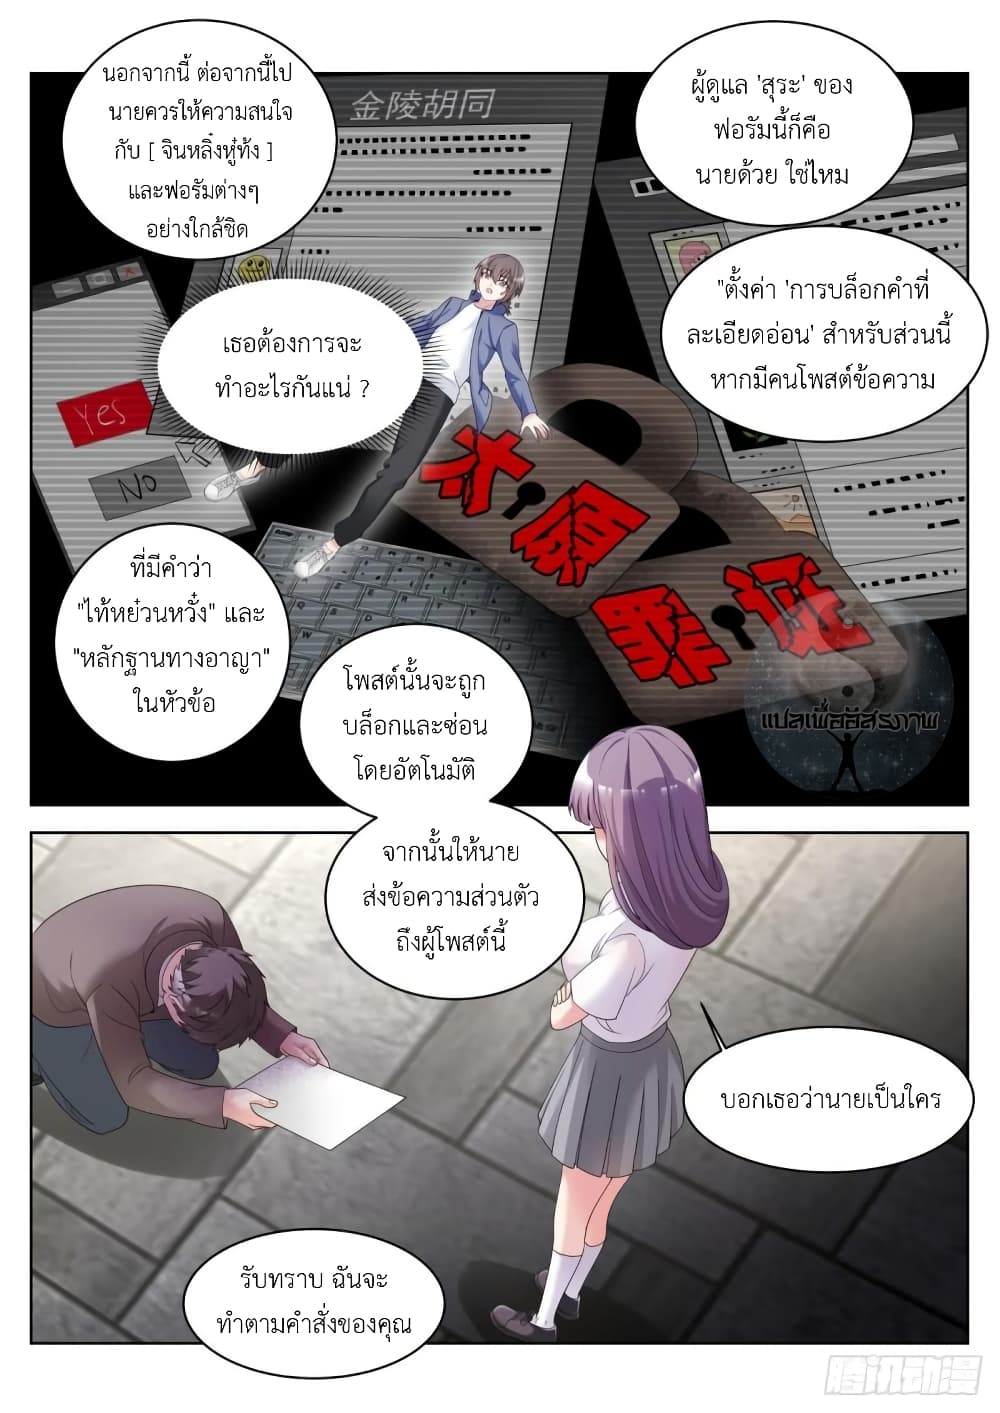 Miss, Something's Wrong With You สาวน้อยคุณคิดผิดแล้ว 33-33